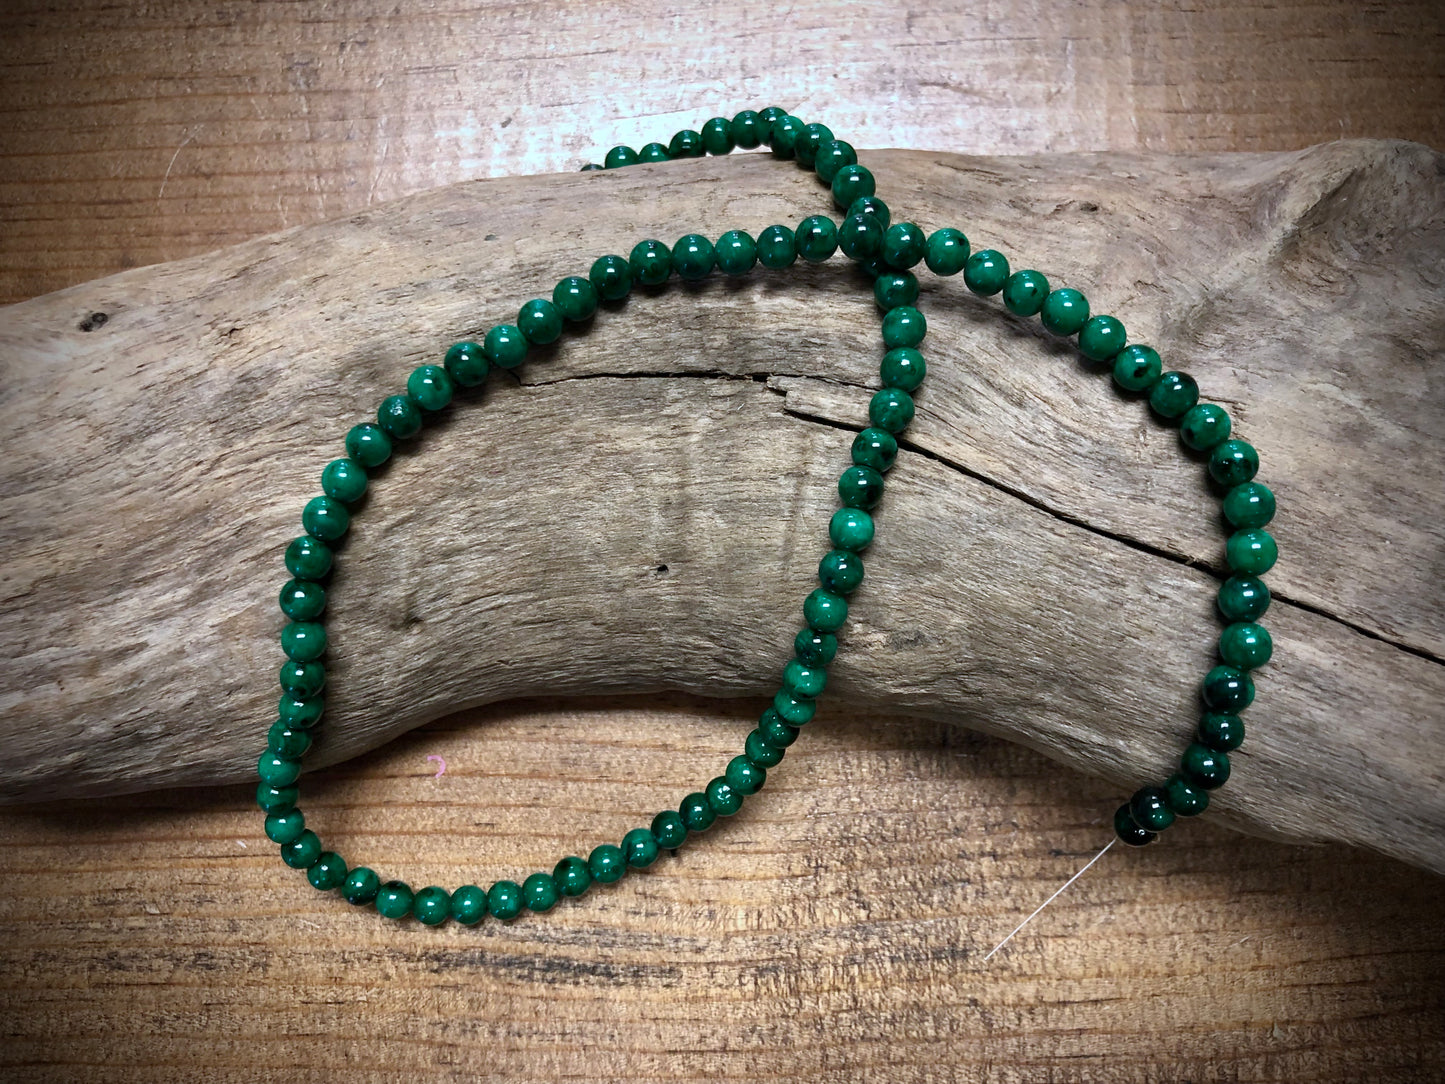 Dyed Jade Smooth Rounds - Green - 4mm - 15.5"